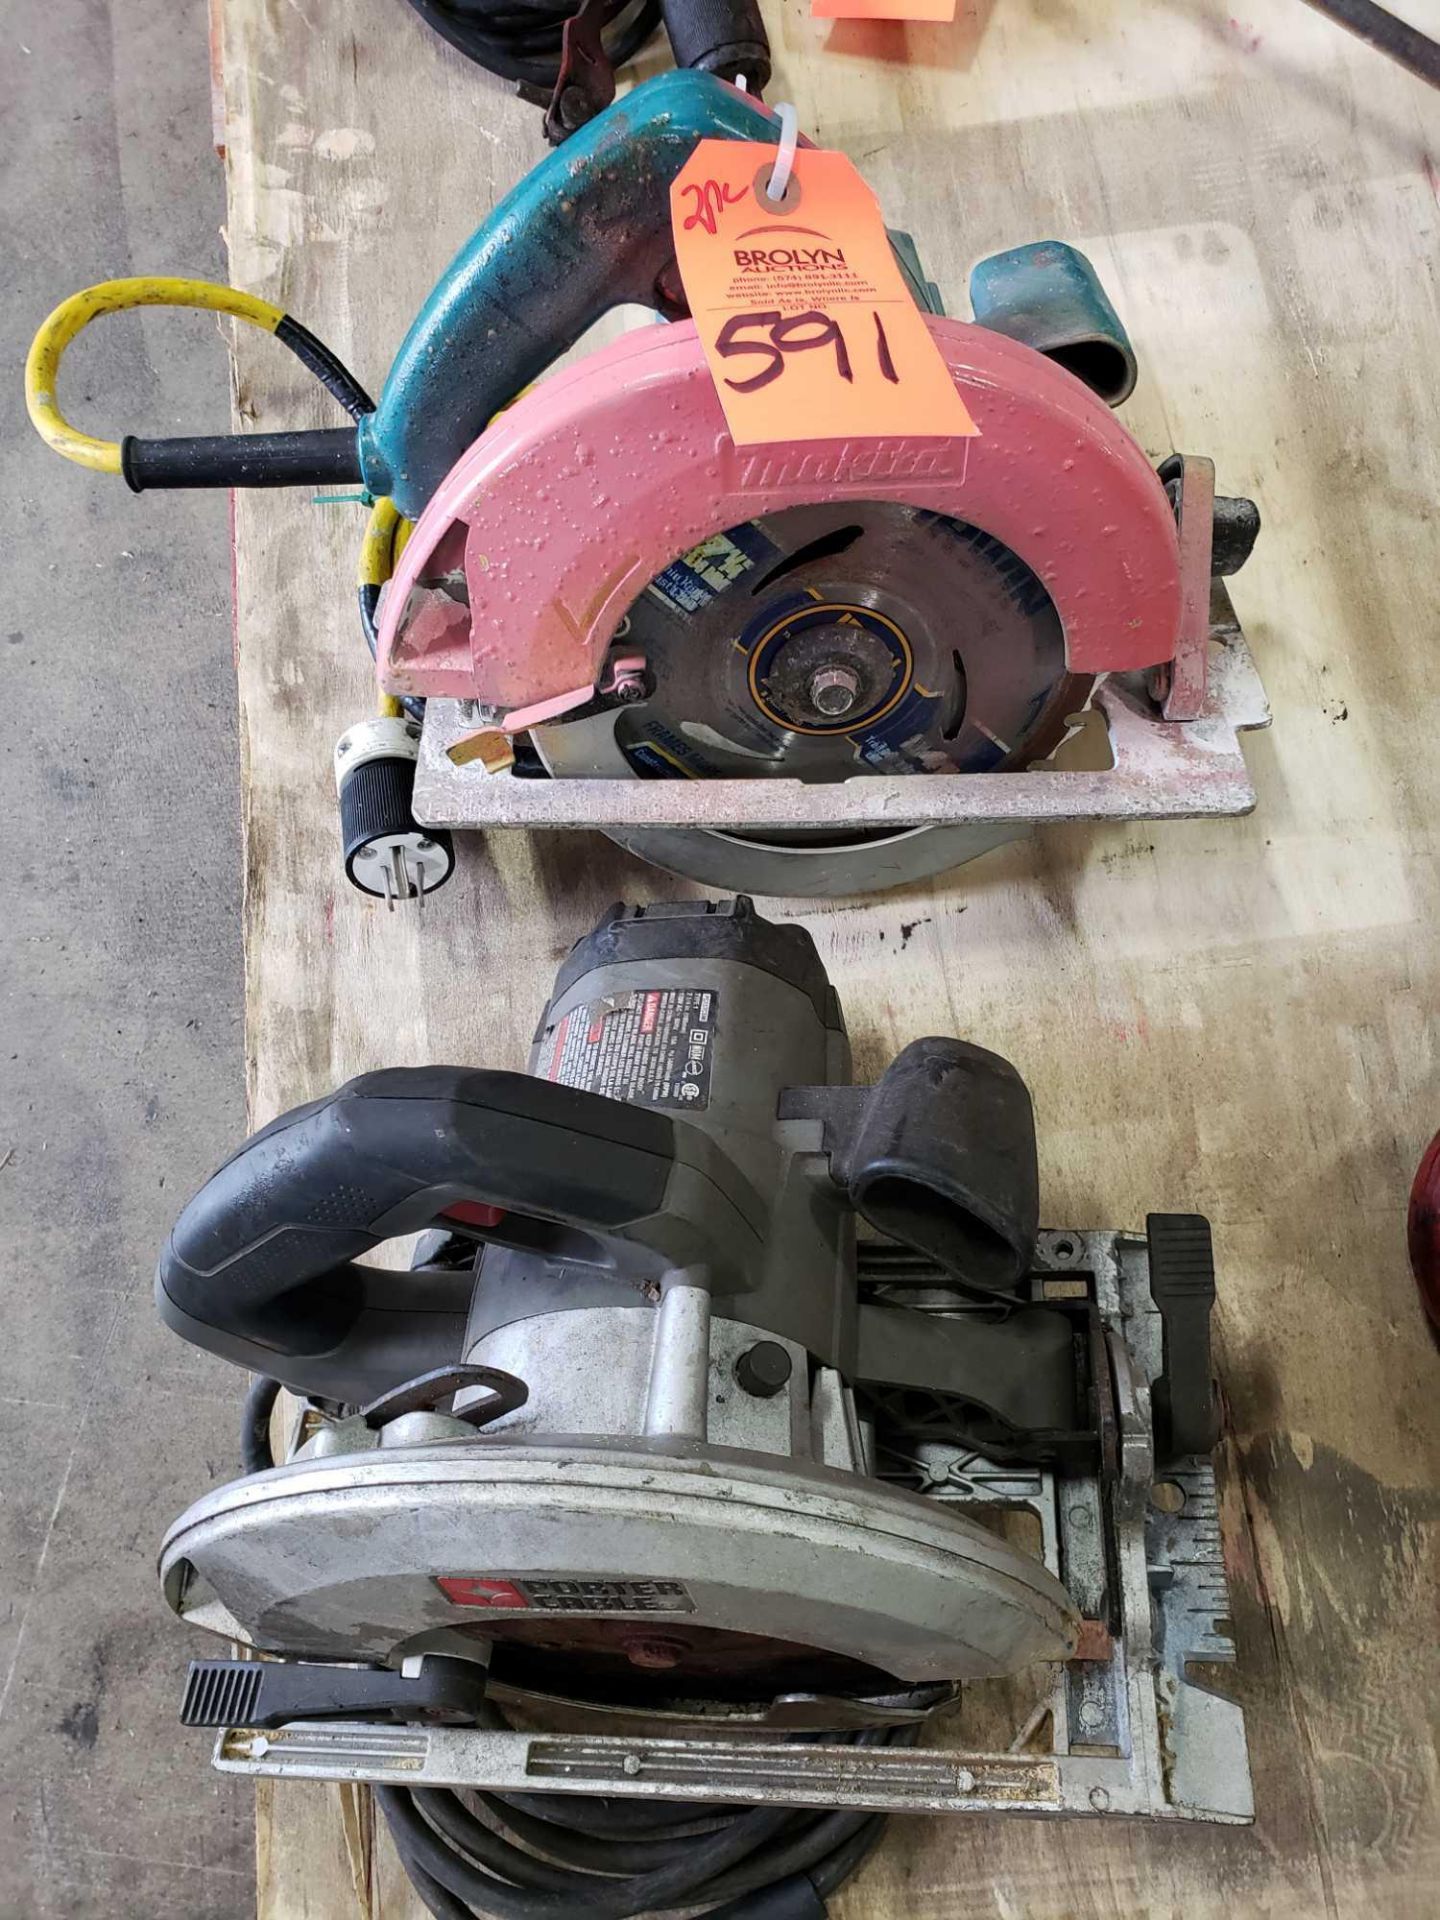 Qty 2 - circular saw as pictured.